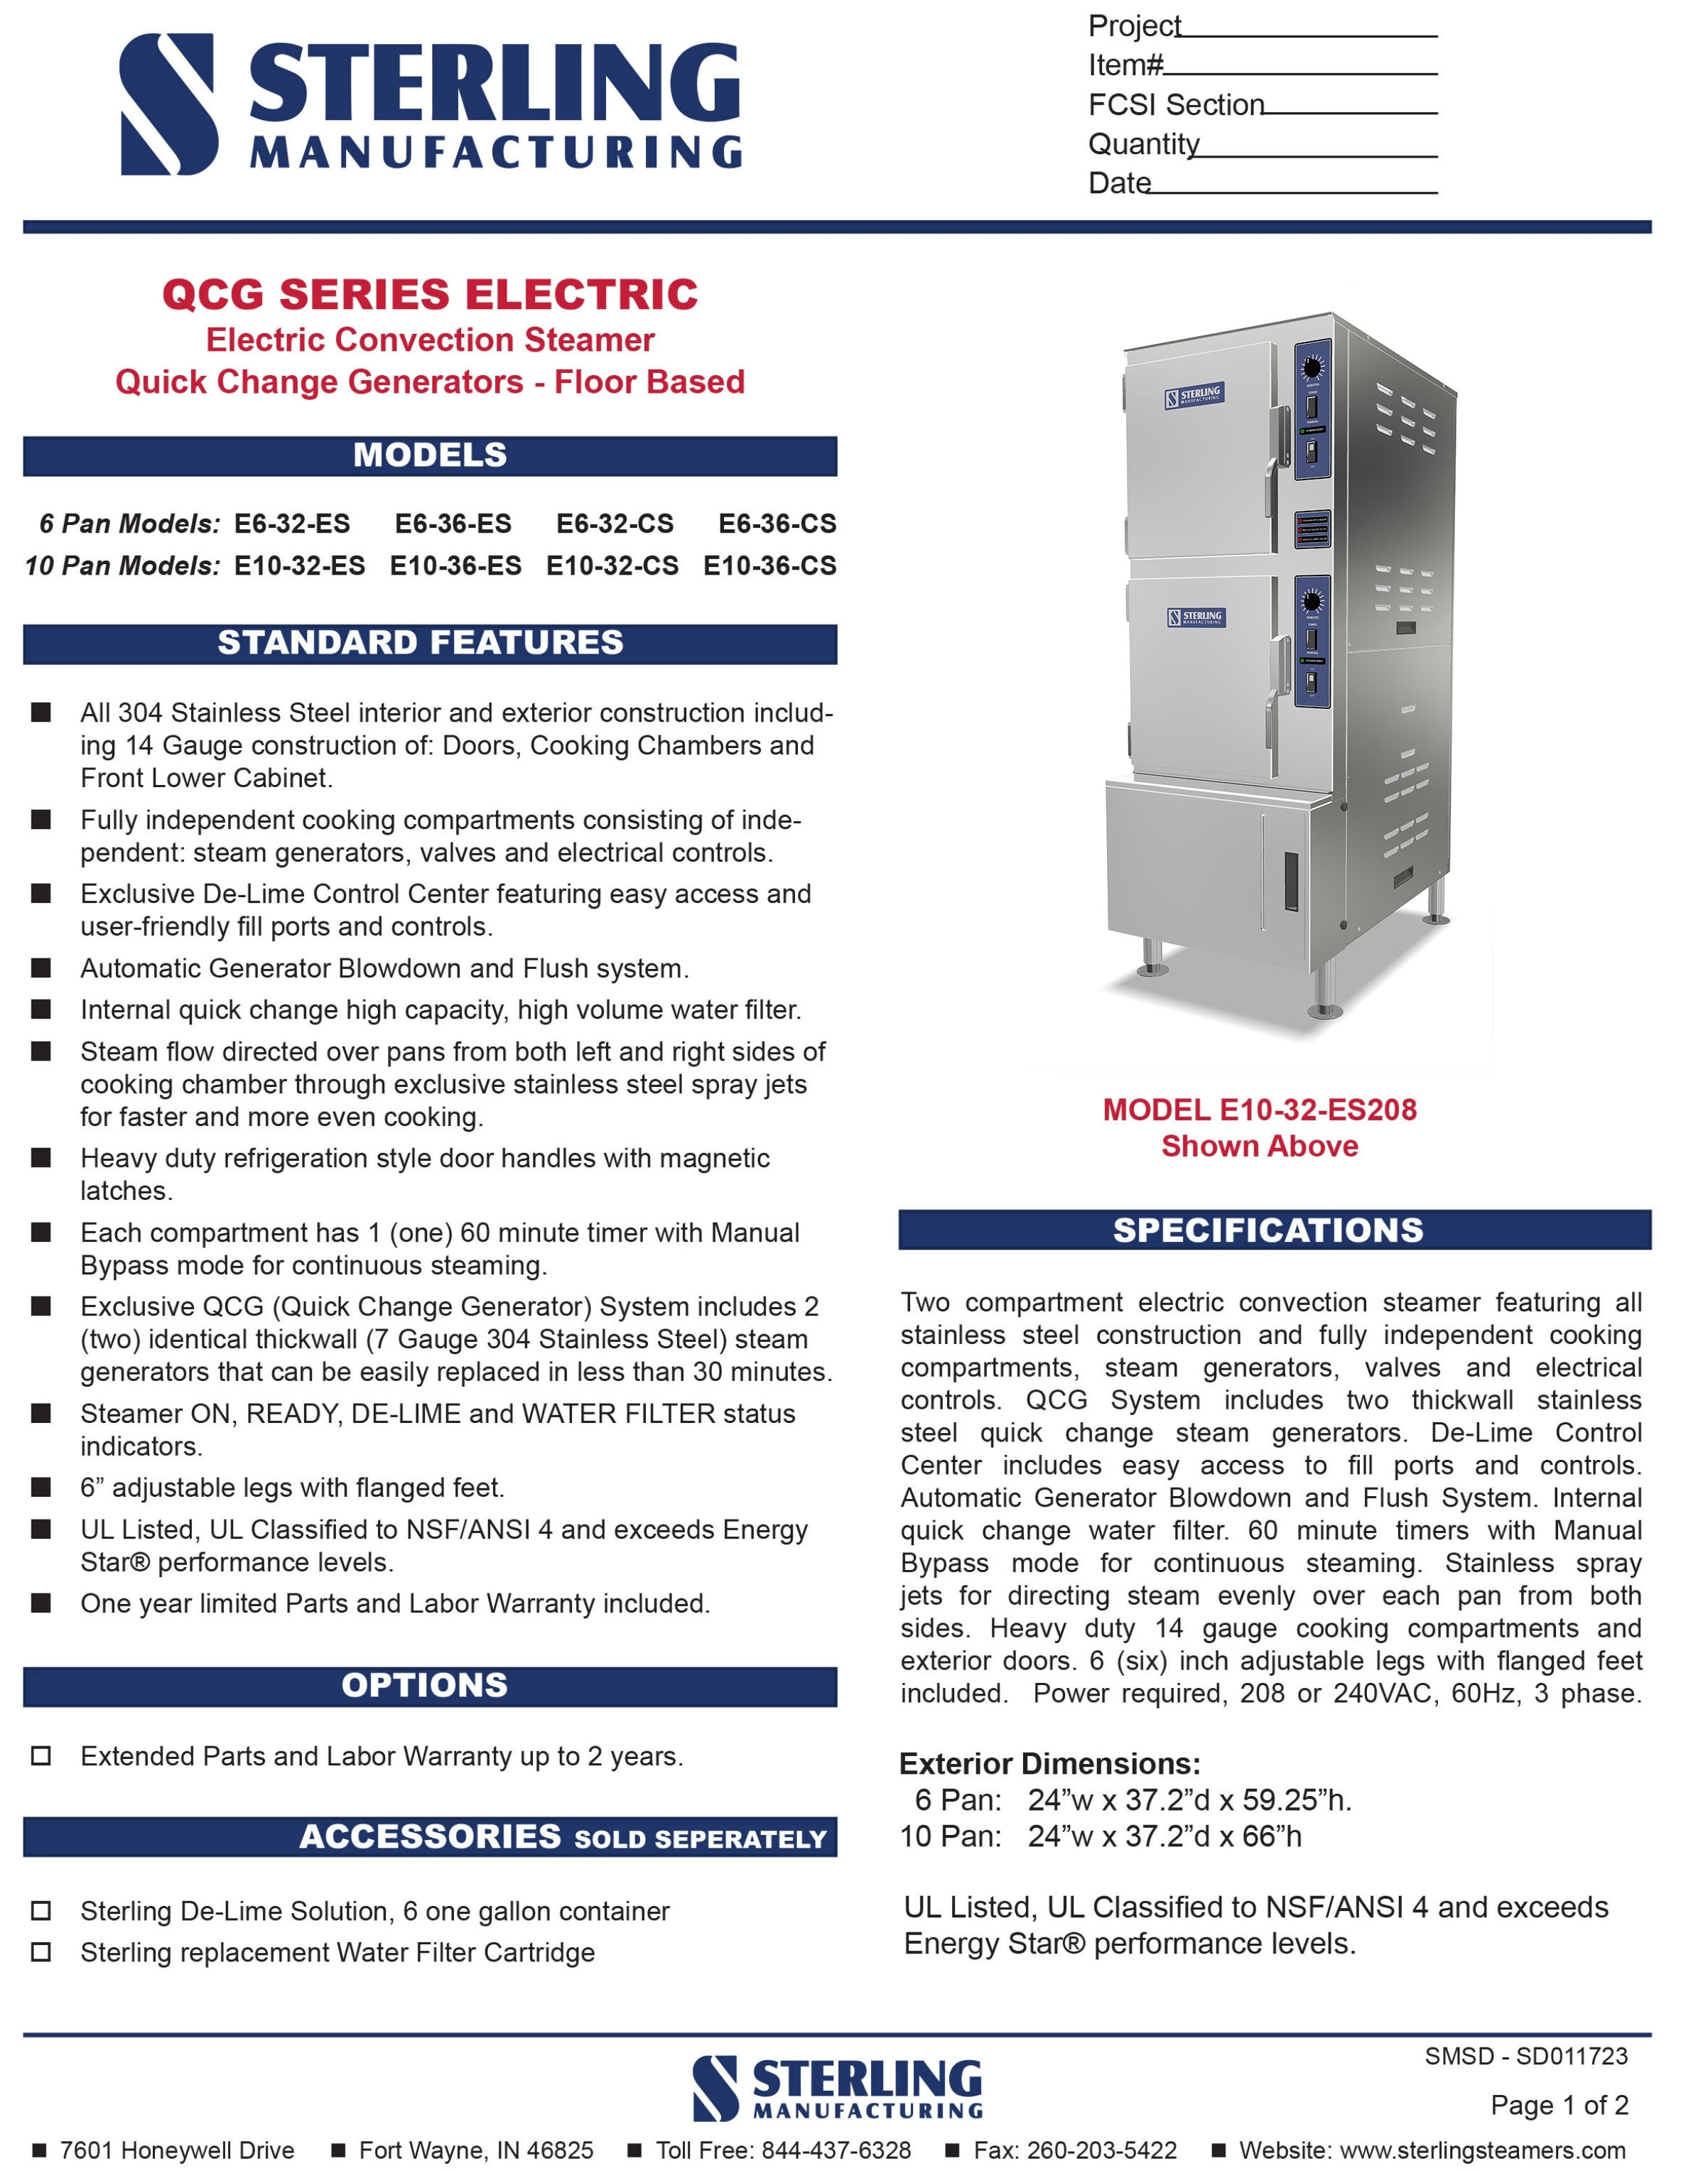 QCG Series Electric Models and Features broacher